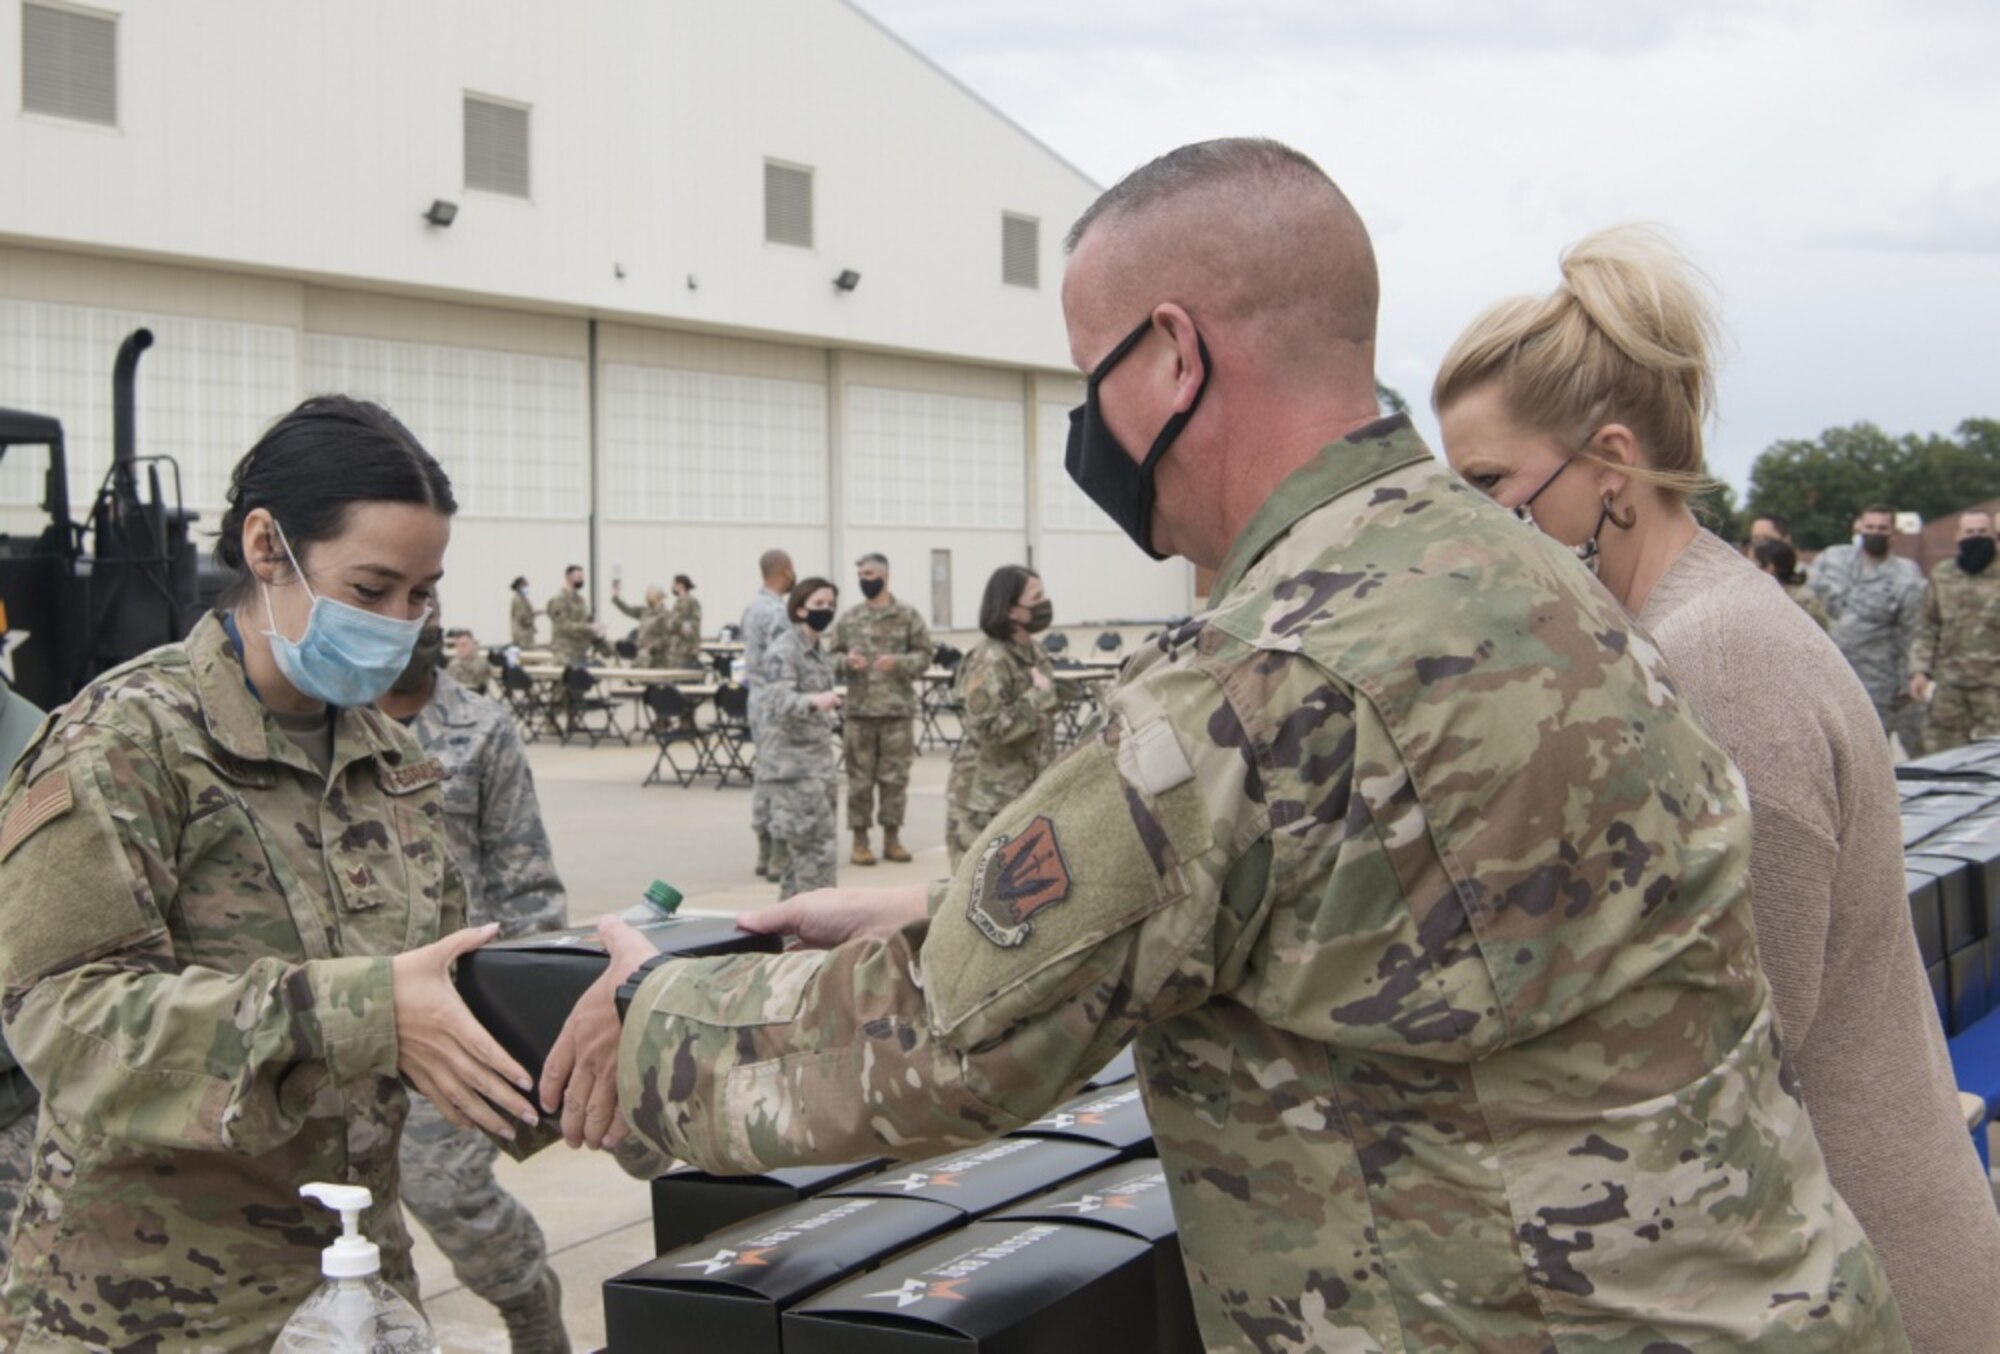 An Airman receives a lunch box from another Airman